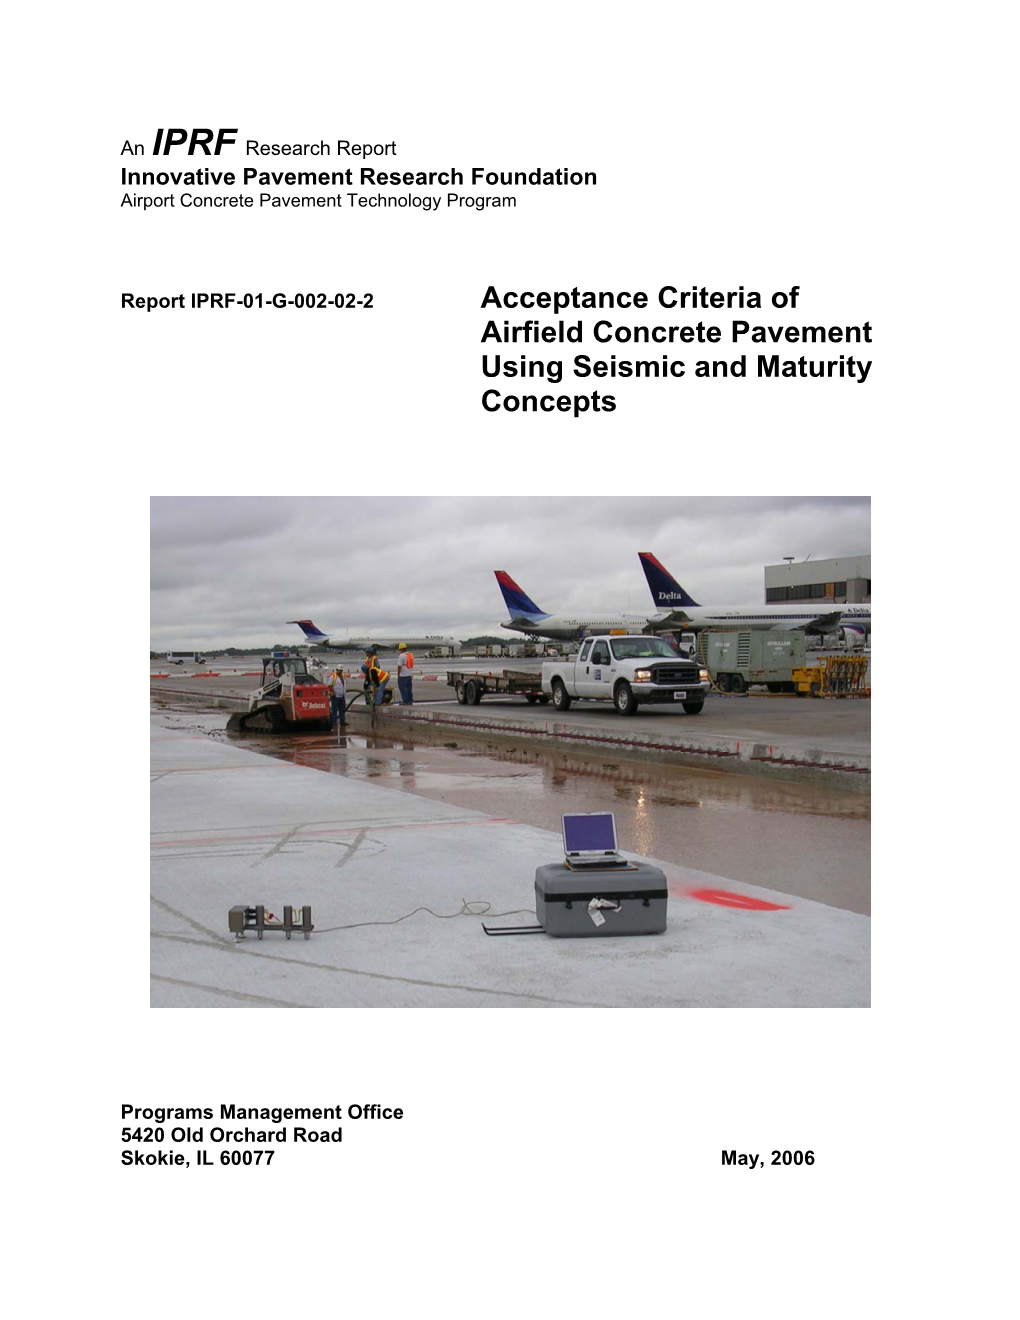 Acceptance Criteria of Airfield Concrete Pavement Using Seismic and Maturity Concepts